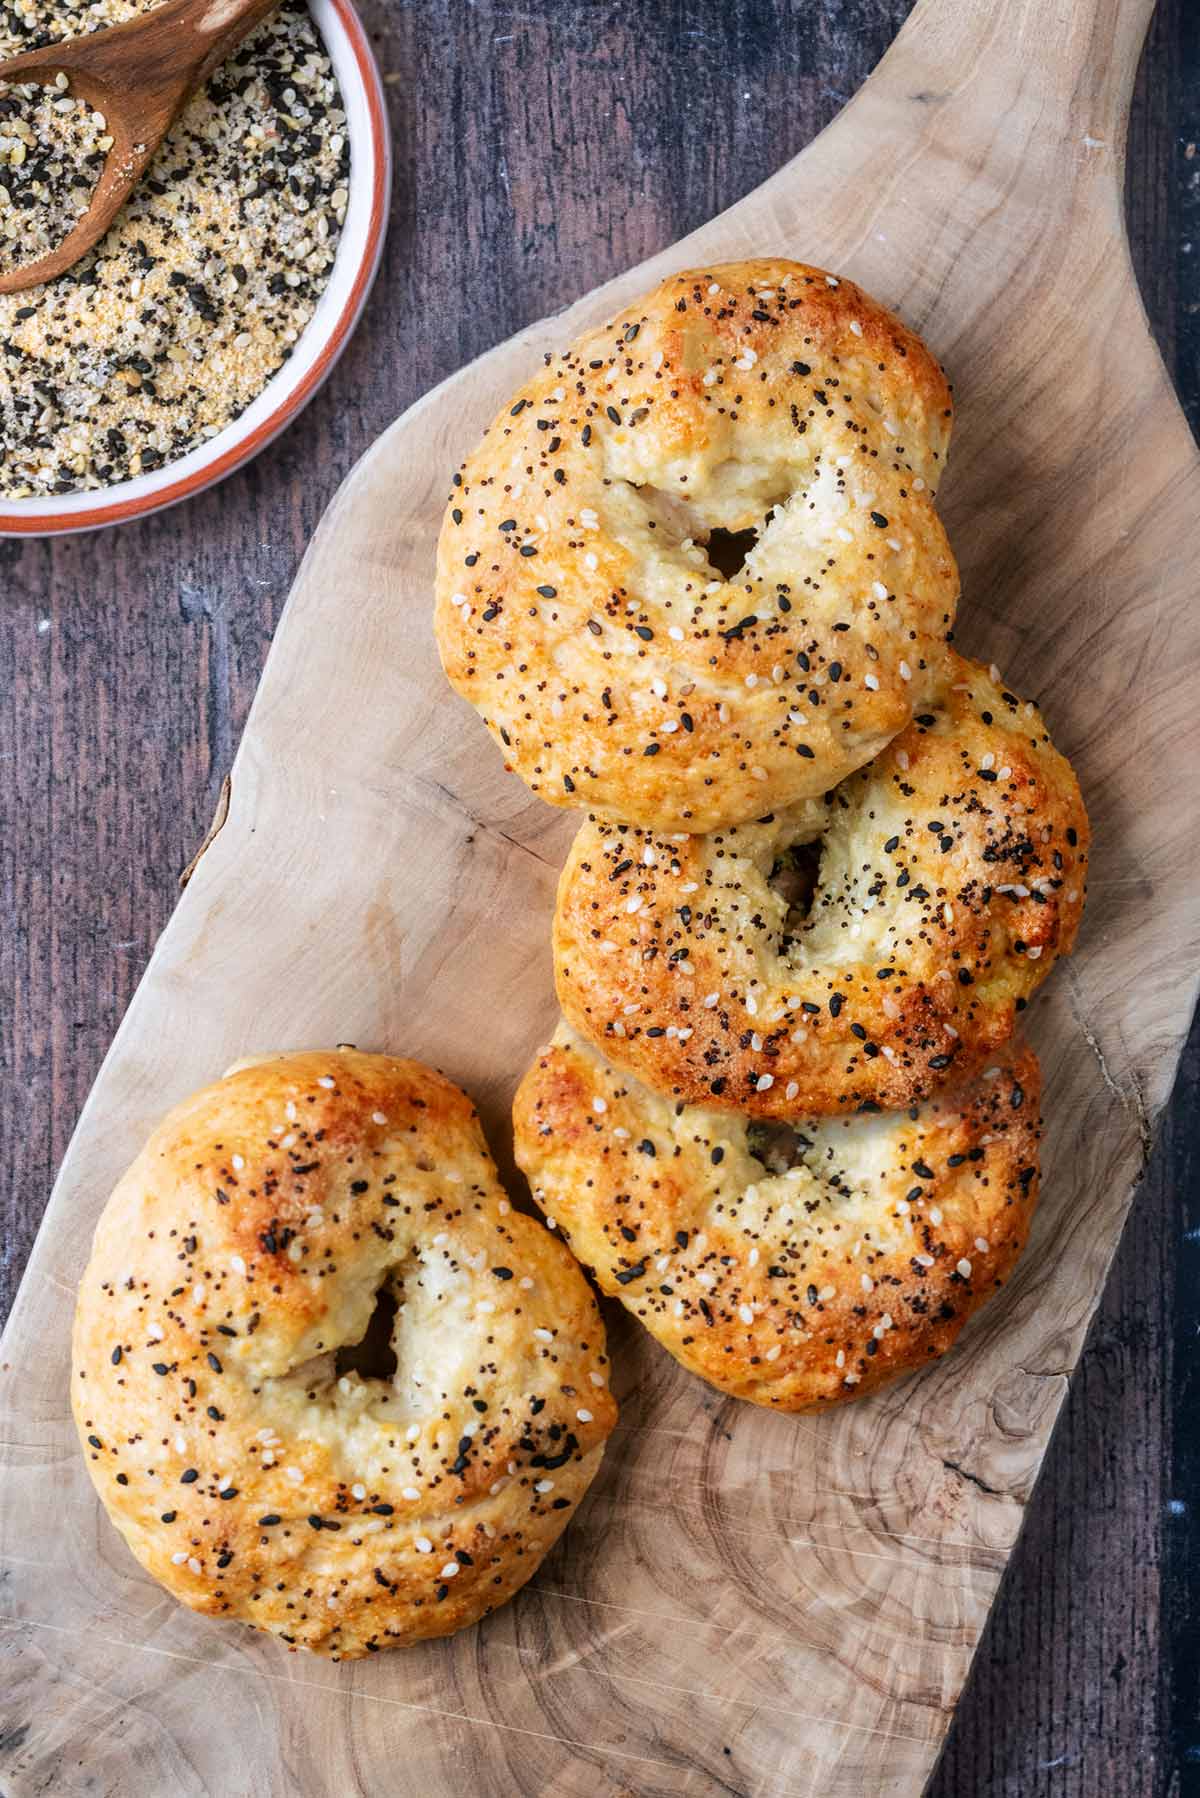 Four seeded bagels on a wooden board next to a bowl of seasoning.